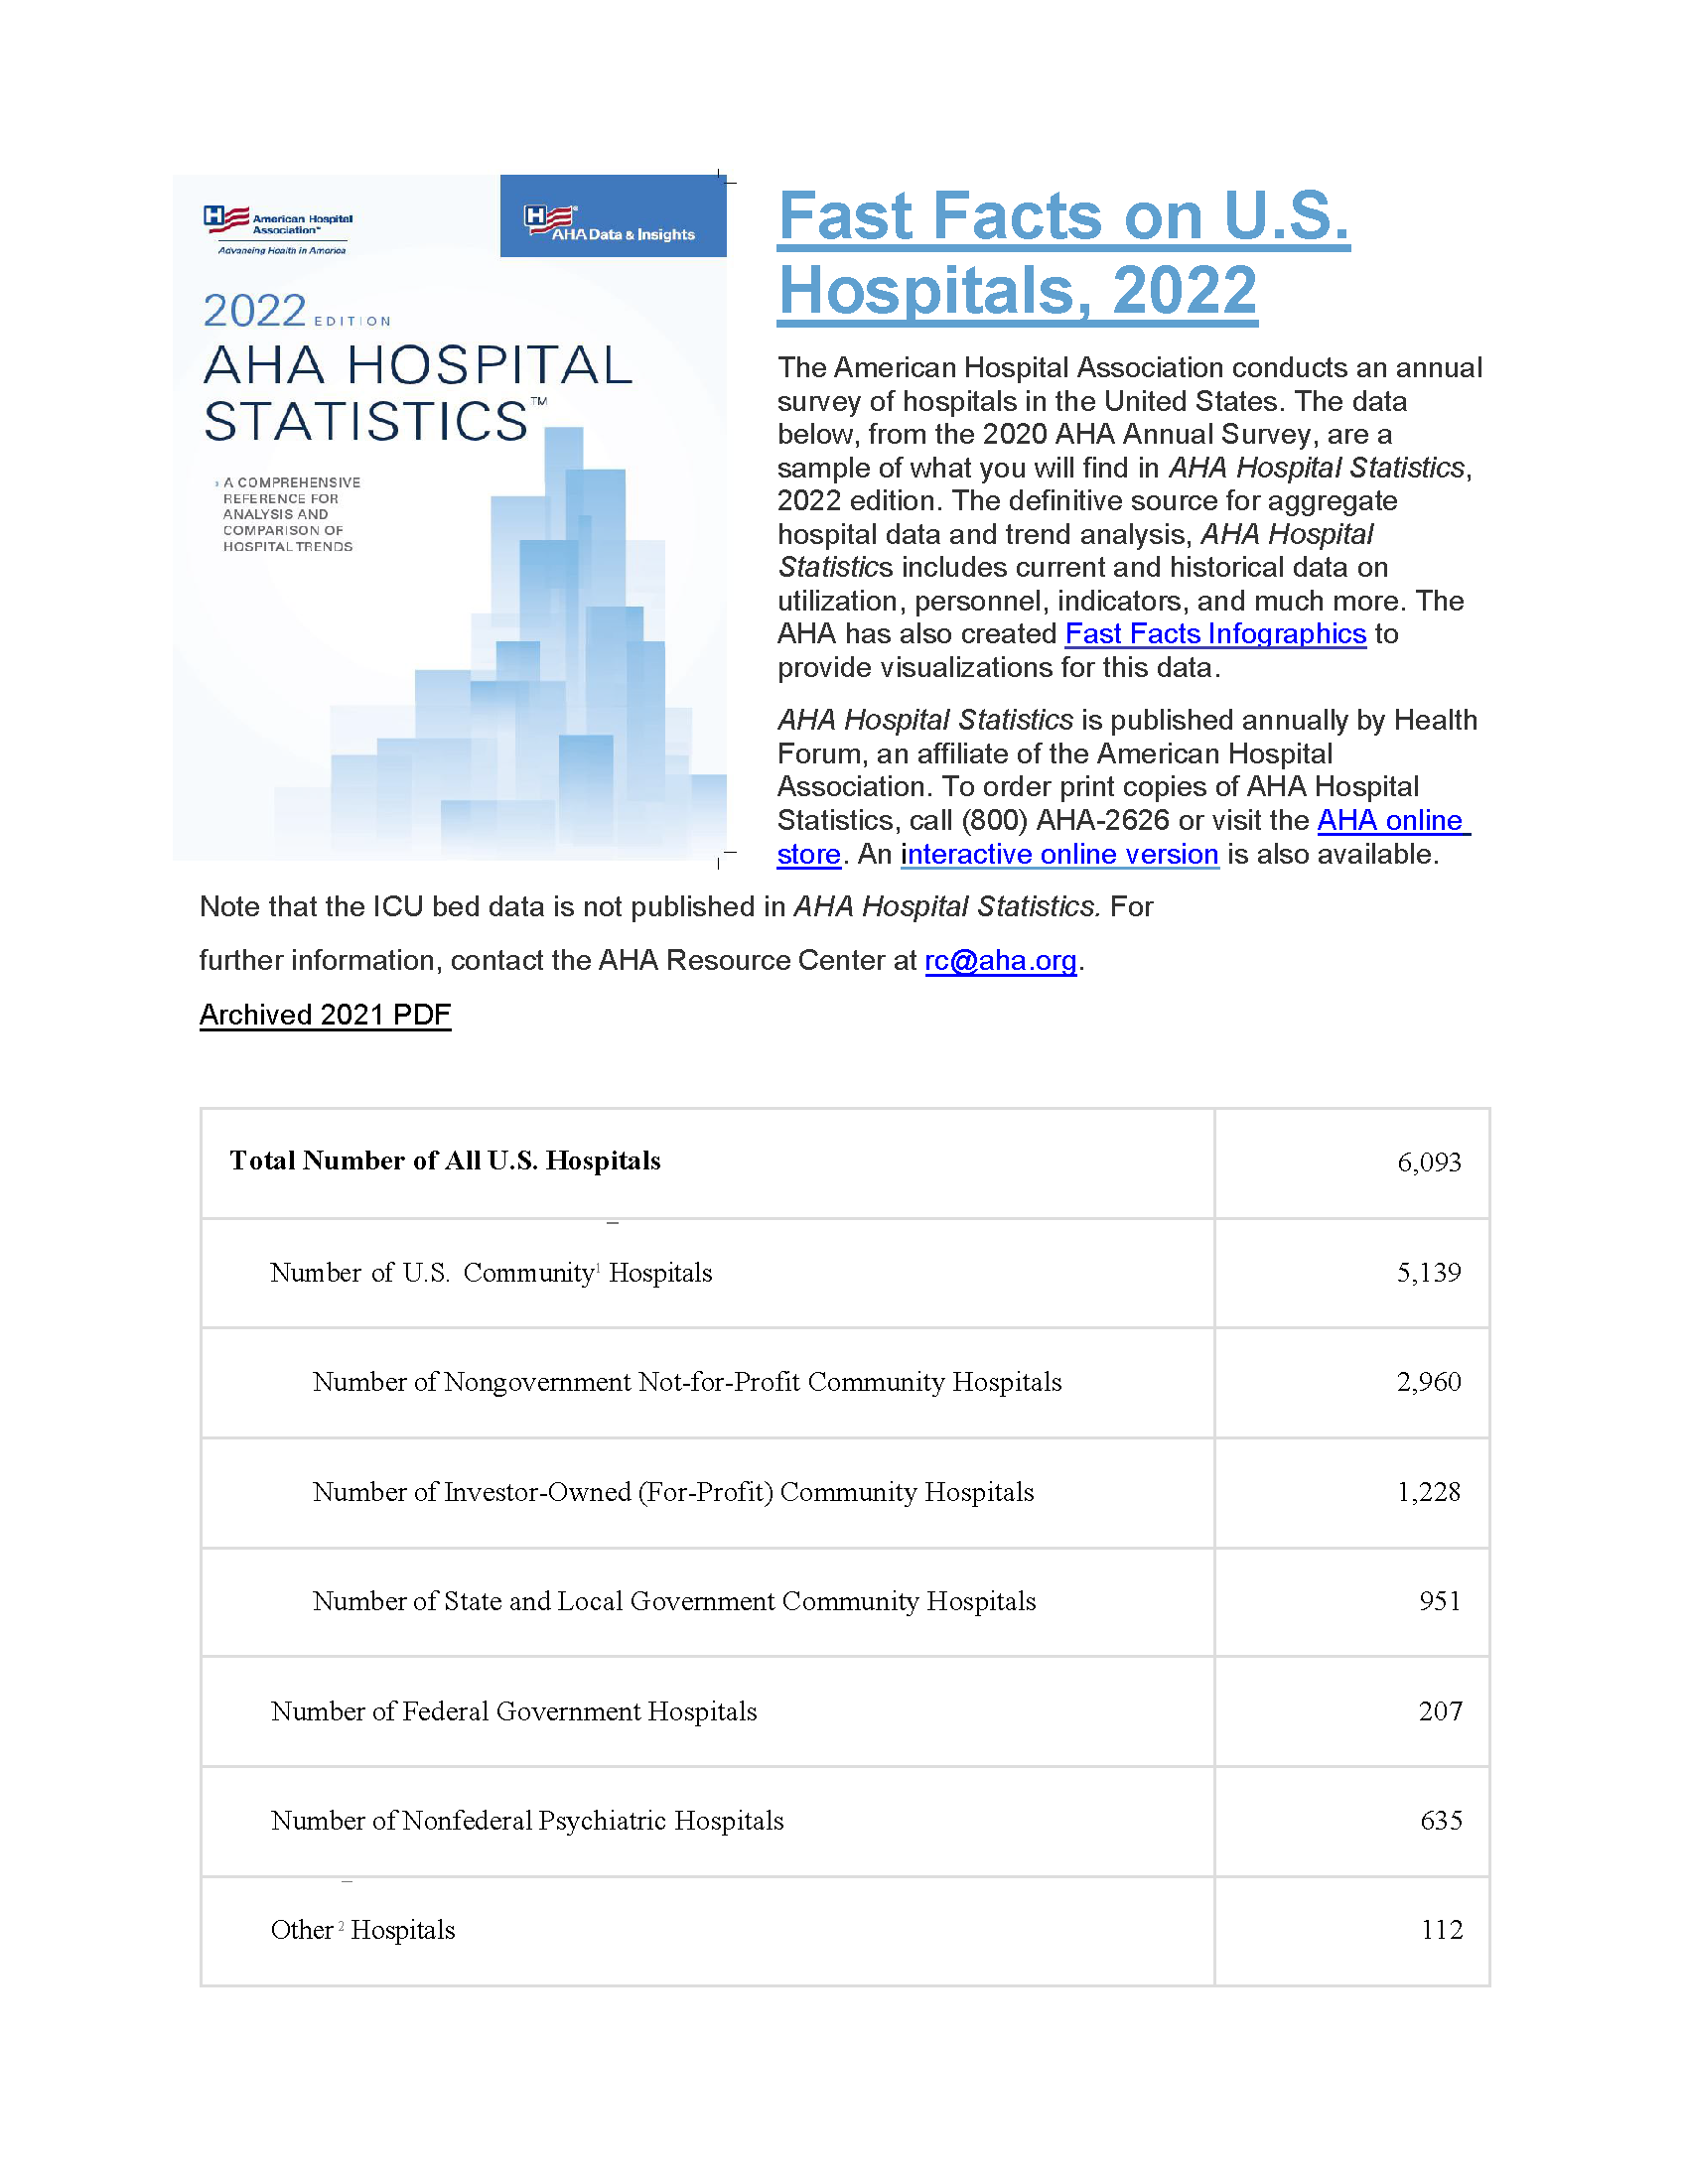 Fast Facts for U.S. Hospitals, 2022: A Comprehensive Reference for Analysis and Comparison of Hospital Trends page 1. The number hospitals in the U.S. and the number of hospital beds in the U.S. Includes how many beds are in hospitals, government hospitals, and state hospitals.